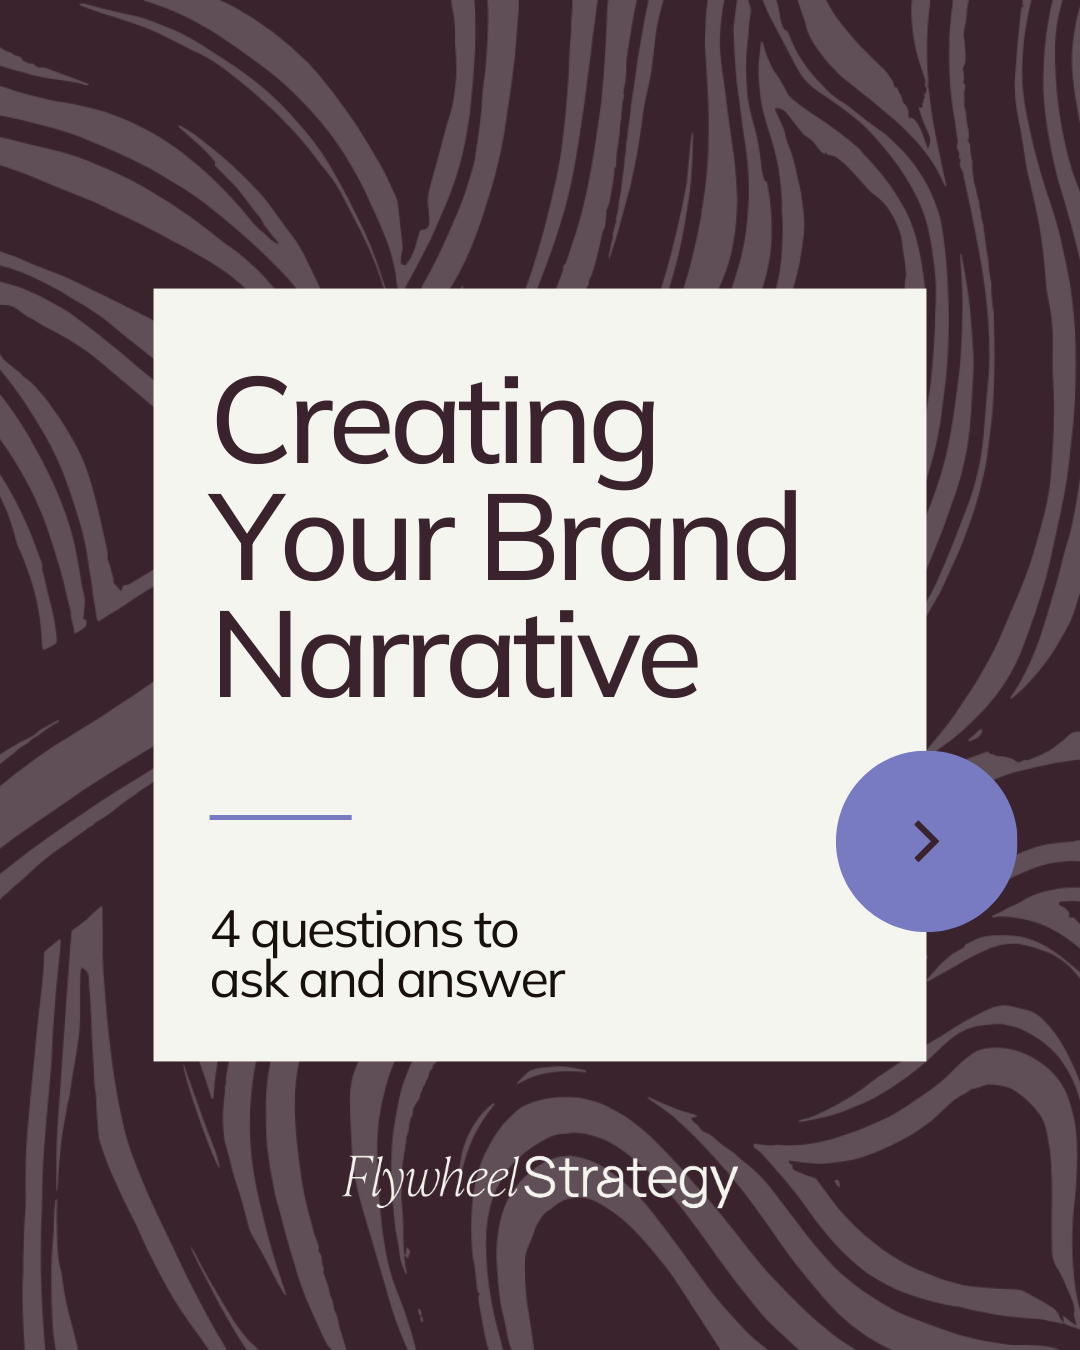 Creating Your Brand Narrative - Flywheel Strategy